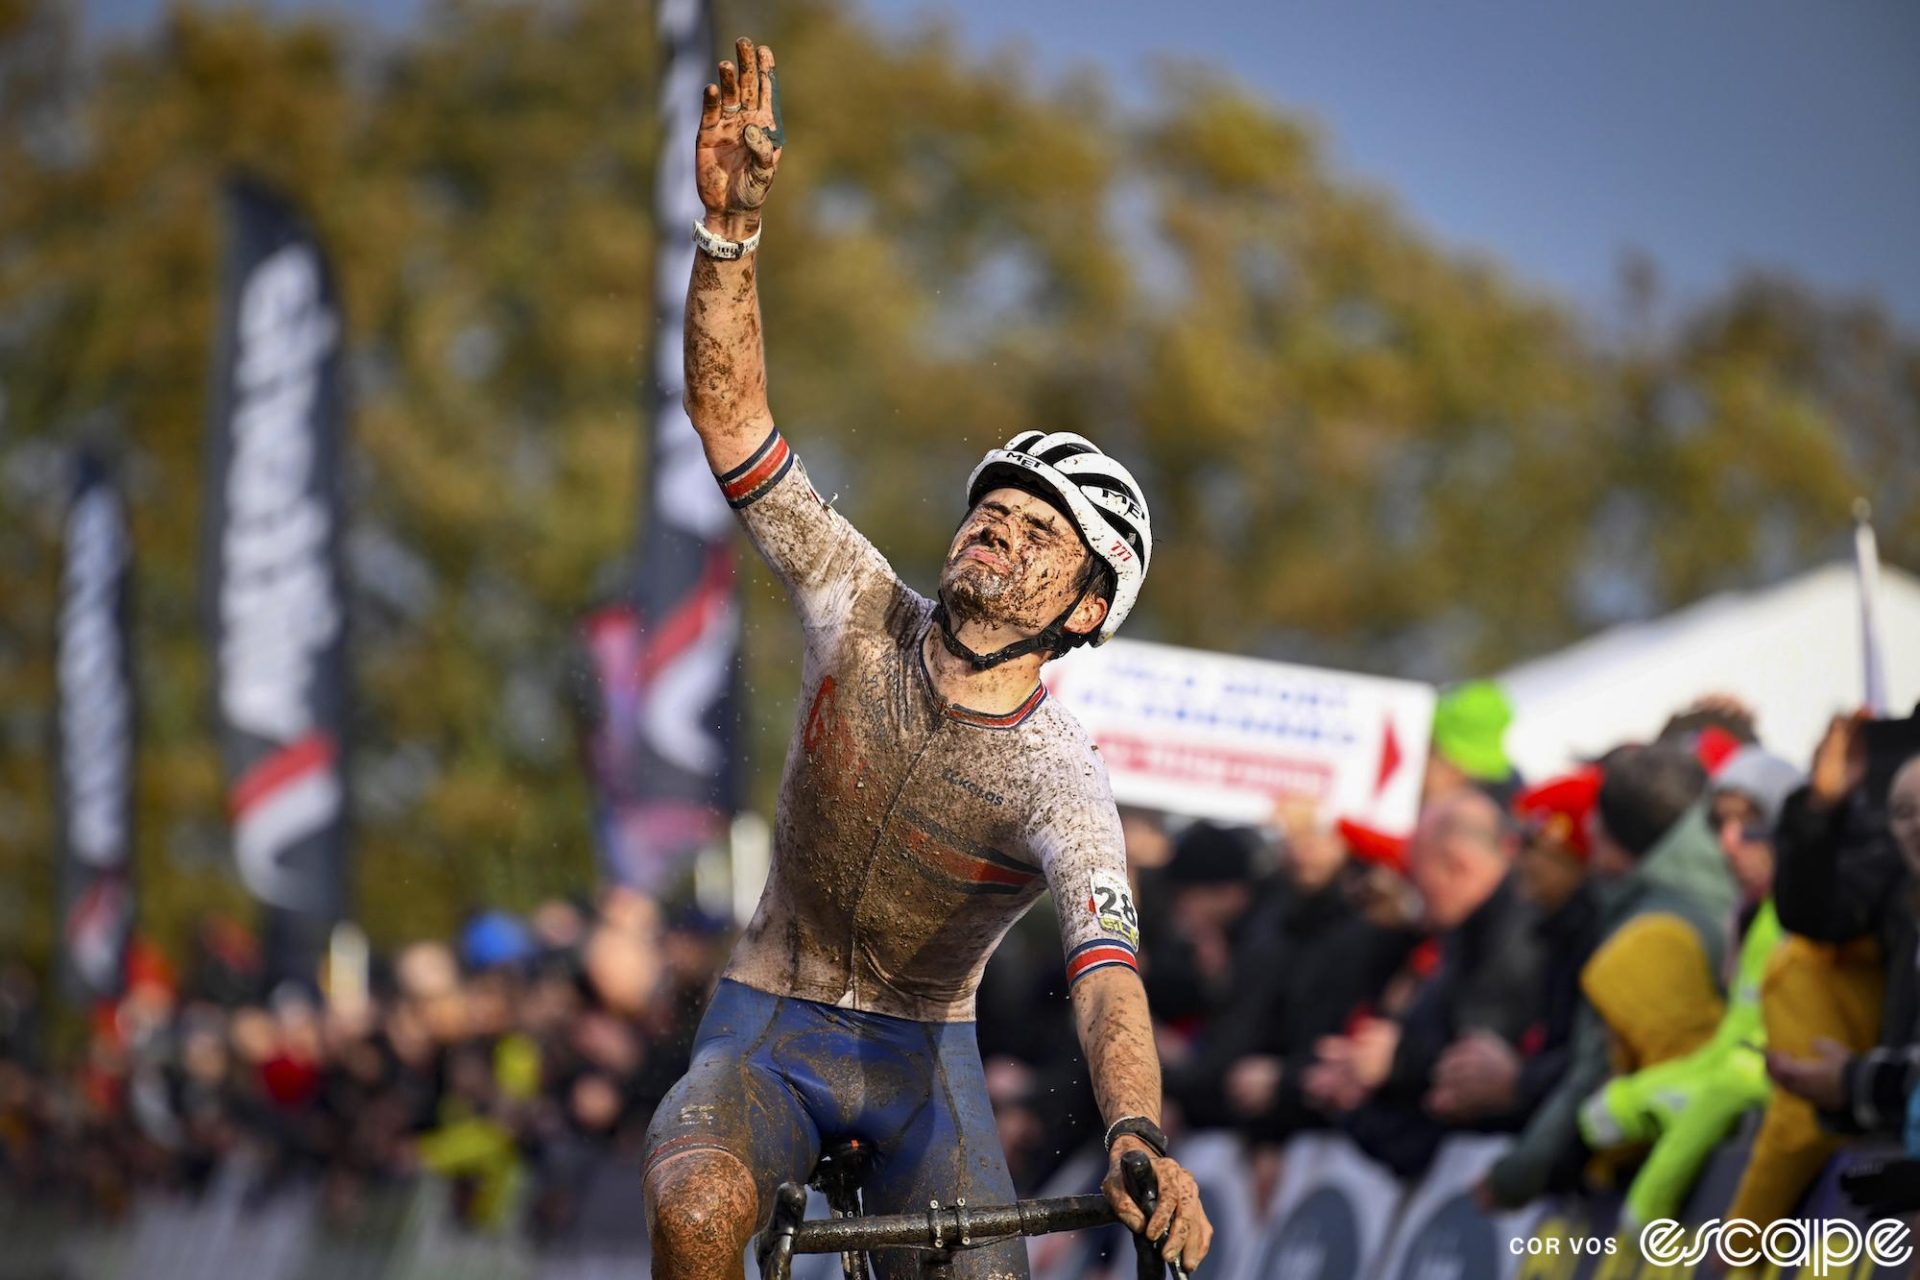 Cameron Mason gestures skyward as he crosses the finish line at the European Continental Championships in 2023. He is covered in mud but his face displays intense emotions as he closes his eyes and looks almost ready to burst into tears.